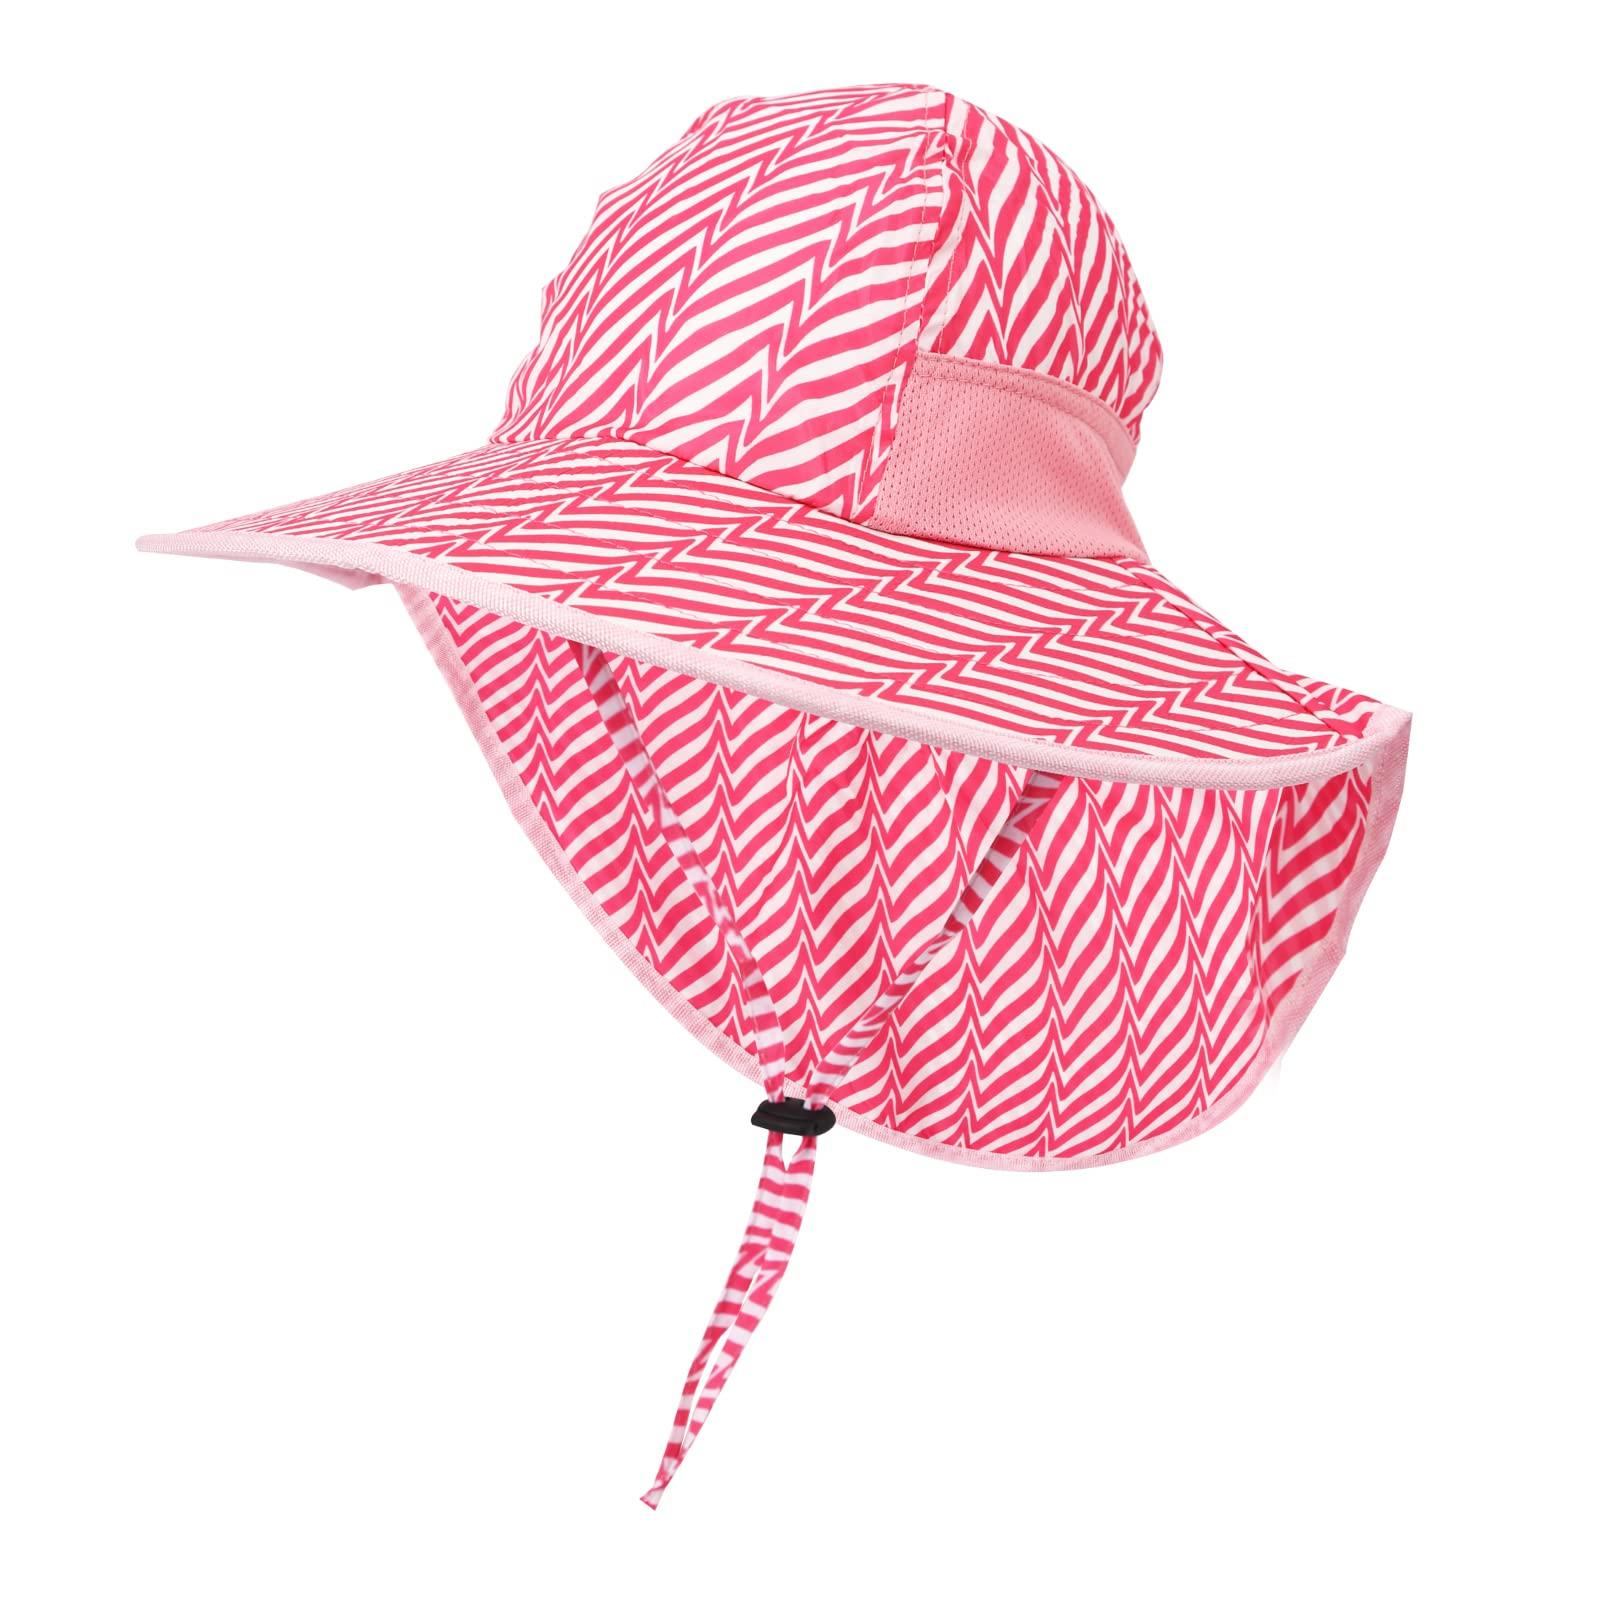 GLAITC Sun Hat Kids, Summer Cap with Neck Flap Adjustable Girls Boys Sun Hat UV Protection Beach Hat with Chin Straps Wide Brim Summer Visor Cap for Baby Toddler and Kids, 3-10 Years (Pink) 0